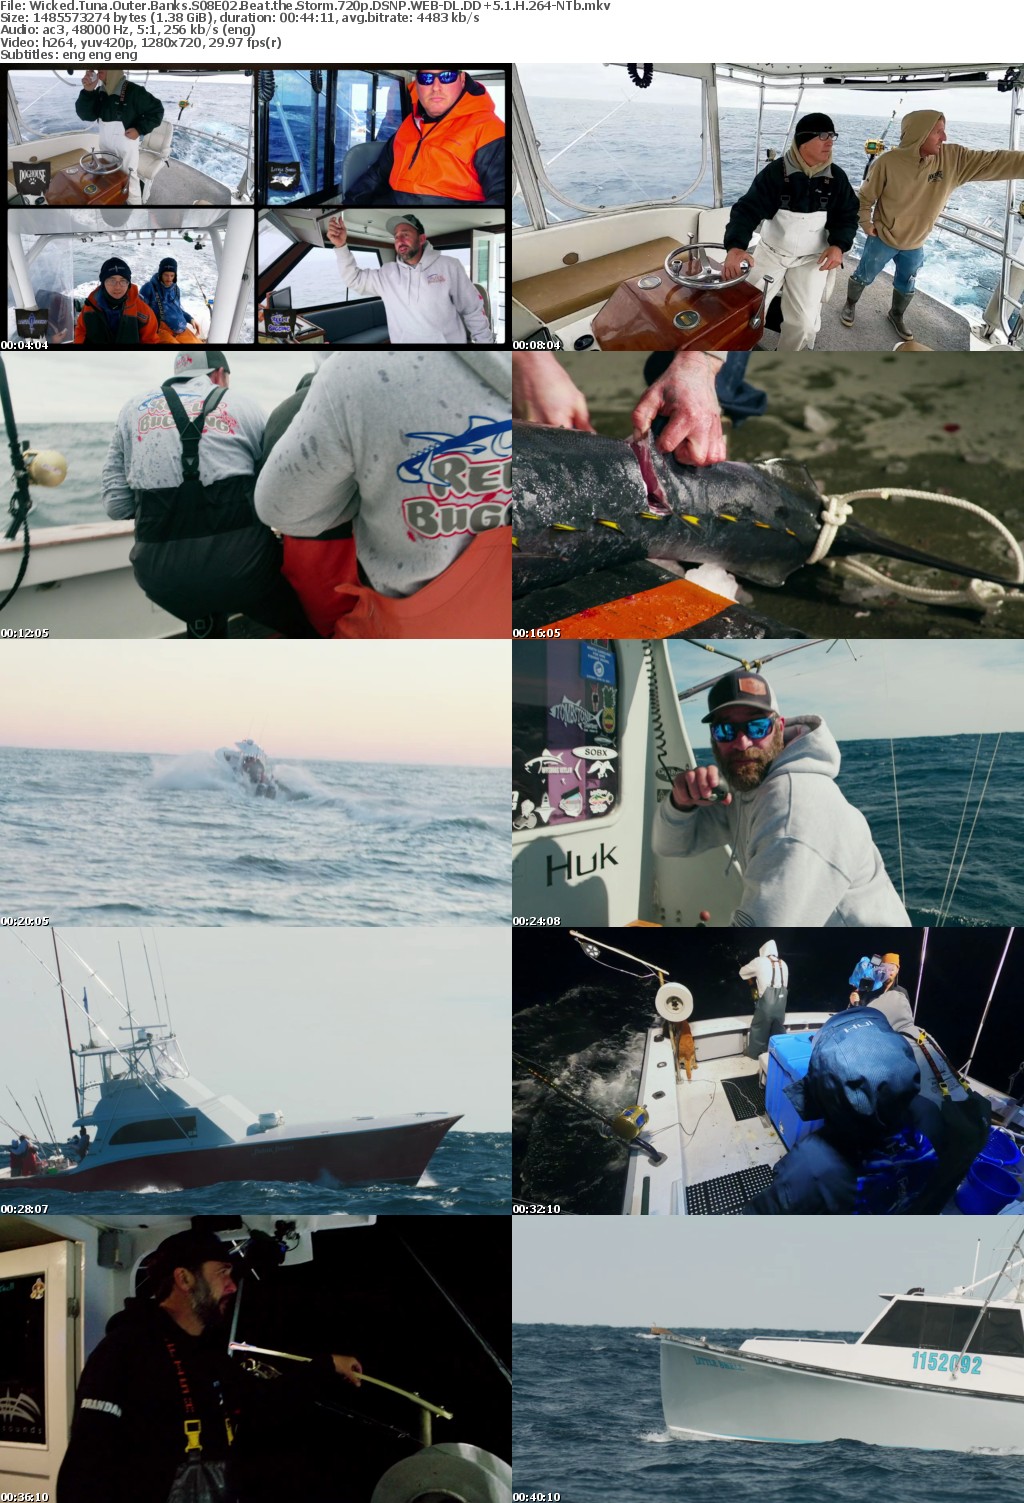 Wicked Tuna Outer Banks S08E02 Beat the Storm 720p DSNP WEBRip DDP5 1 x264-NTb